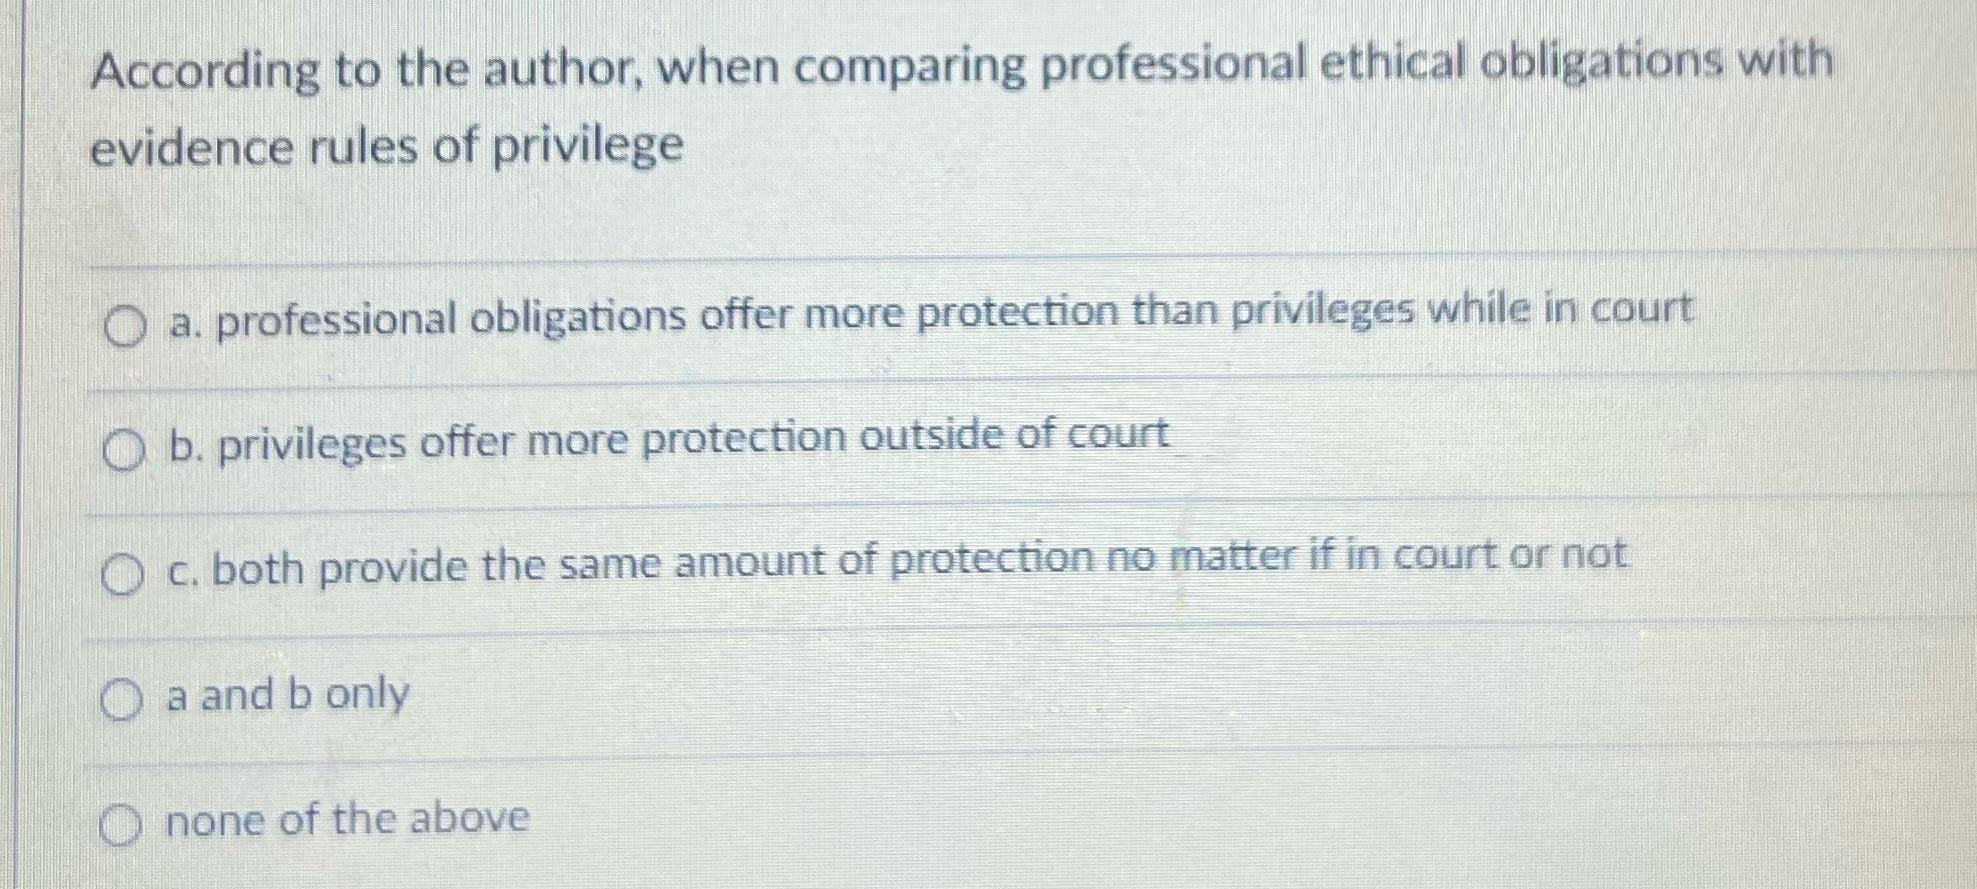 According to the author, when comparing professional ethical obligations with evidence rules of privilege a.